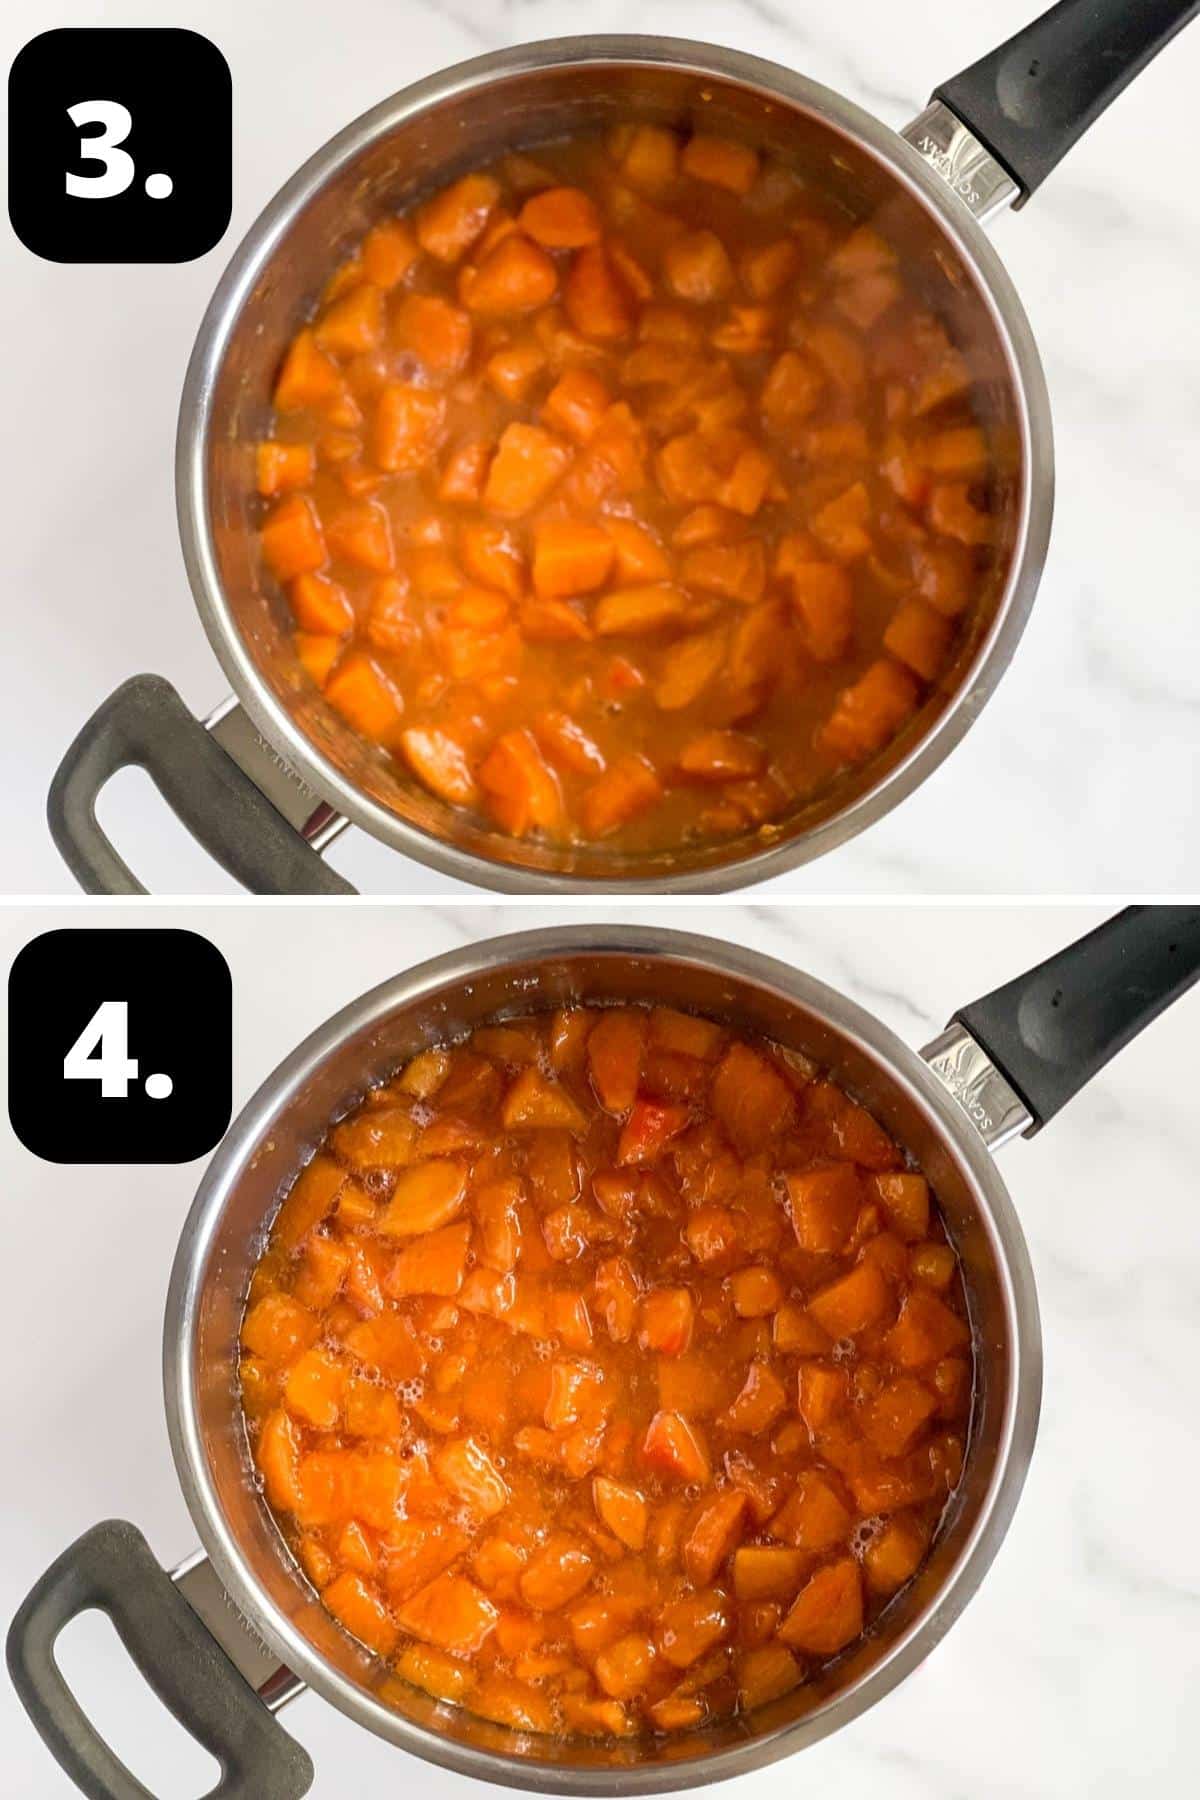 Steps 3-4 of preparing this recipe - the softened Persimmon and once the sugar has been added.